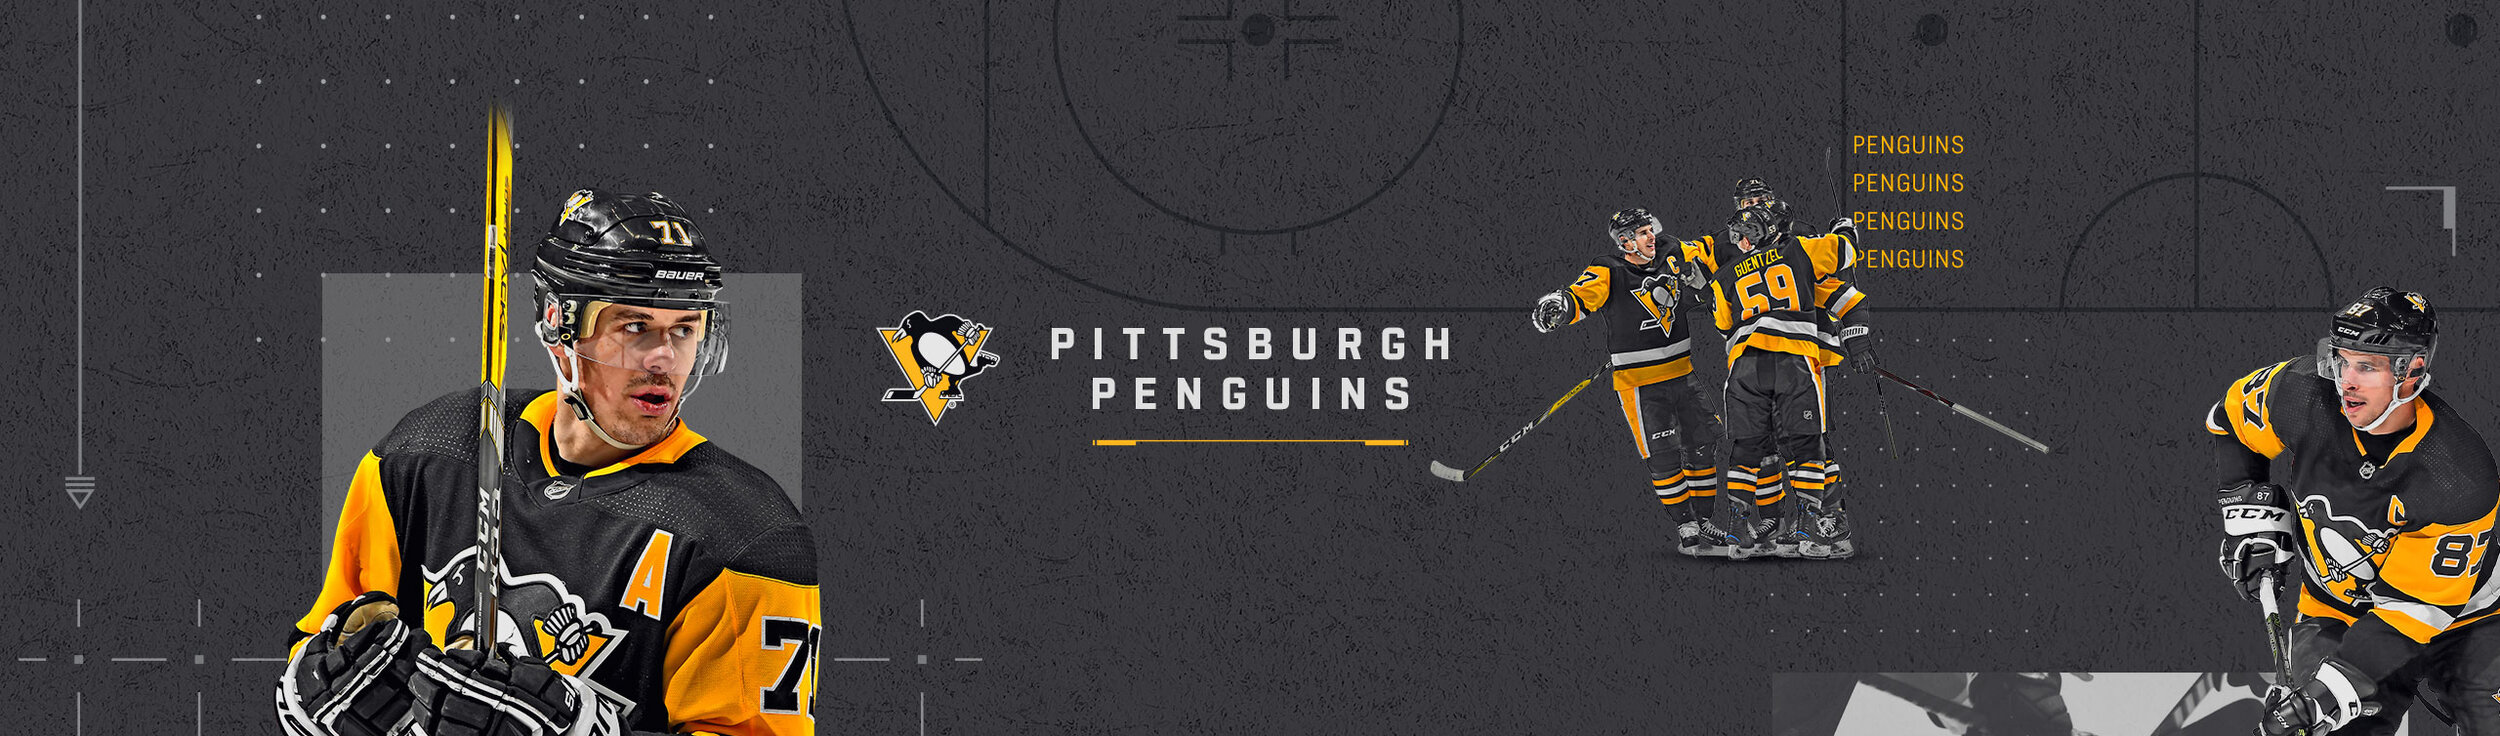 Pittsburgh Penguins 2019.20 Visual Campaign on Behance